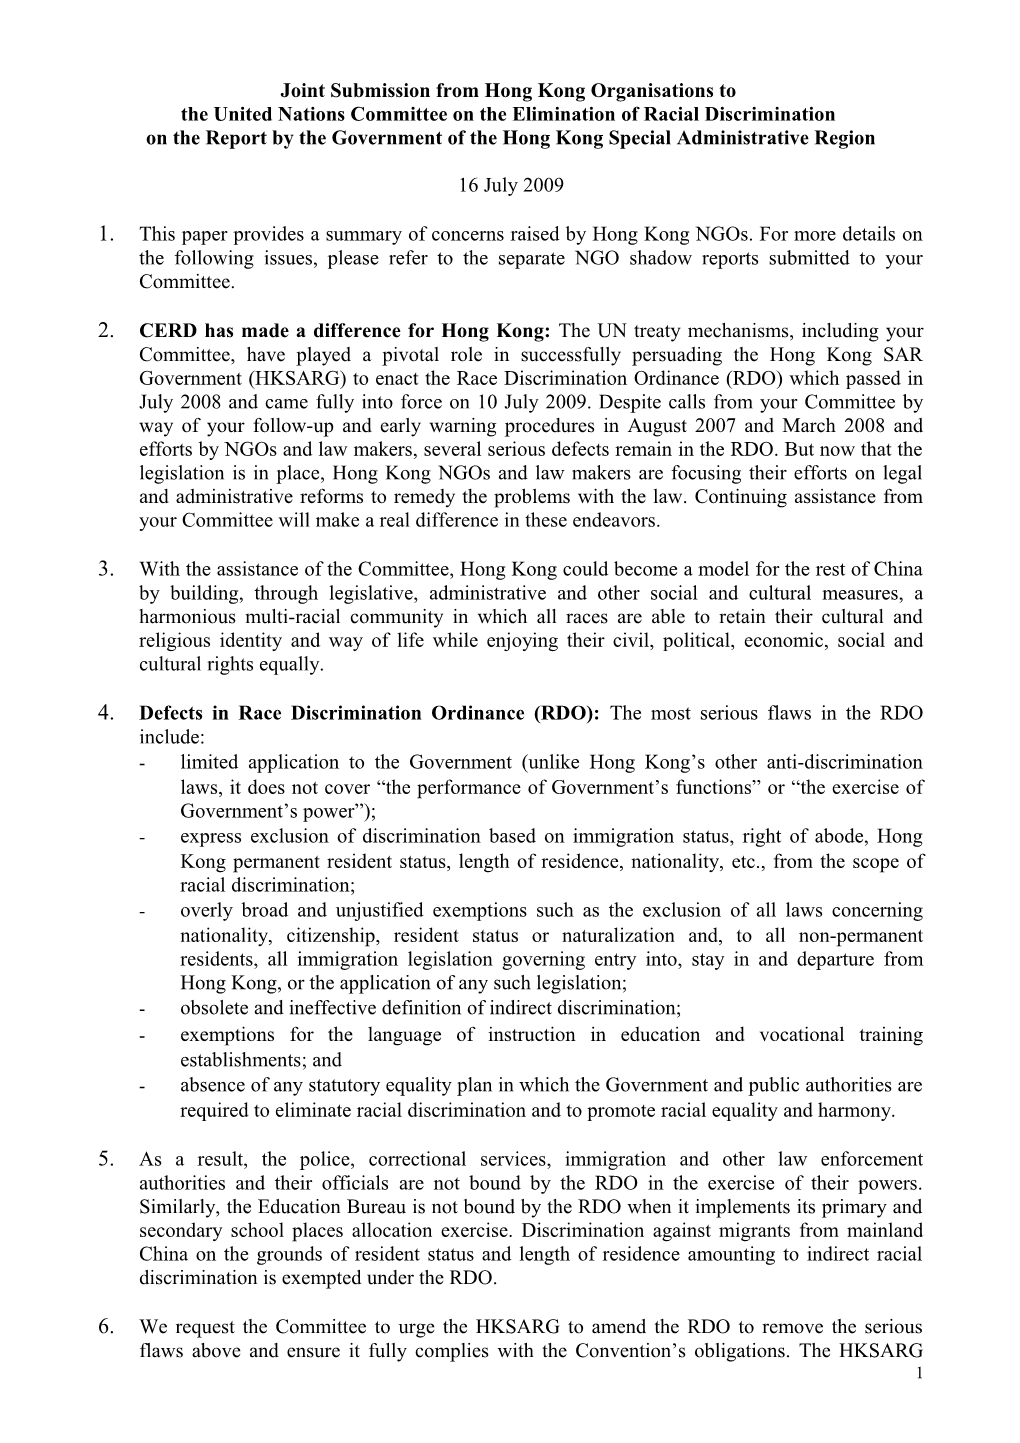 Joint Submission from Hong Kong Organisations to the United Nations Committee on the Elimination